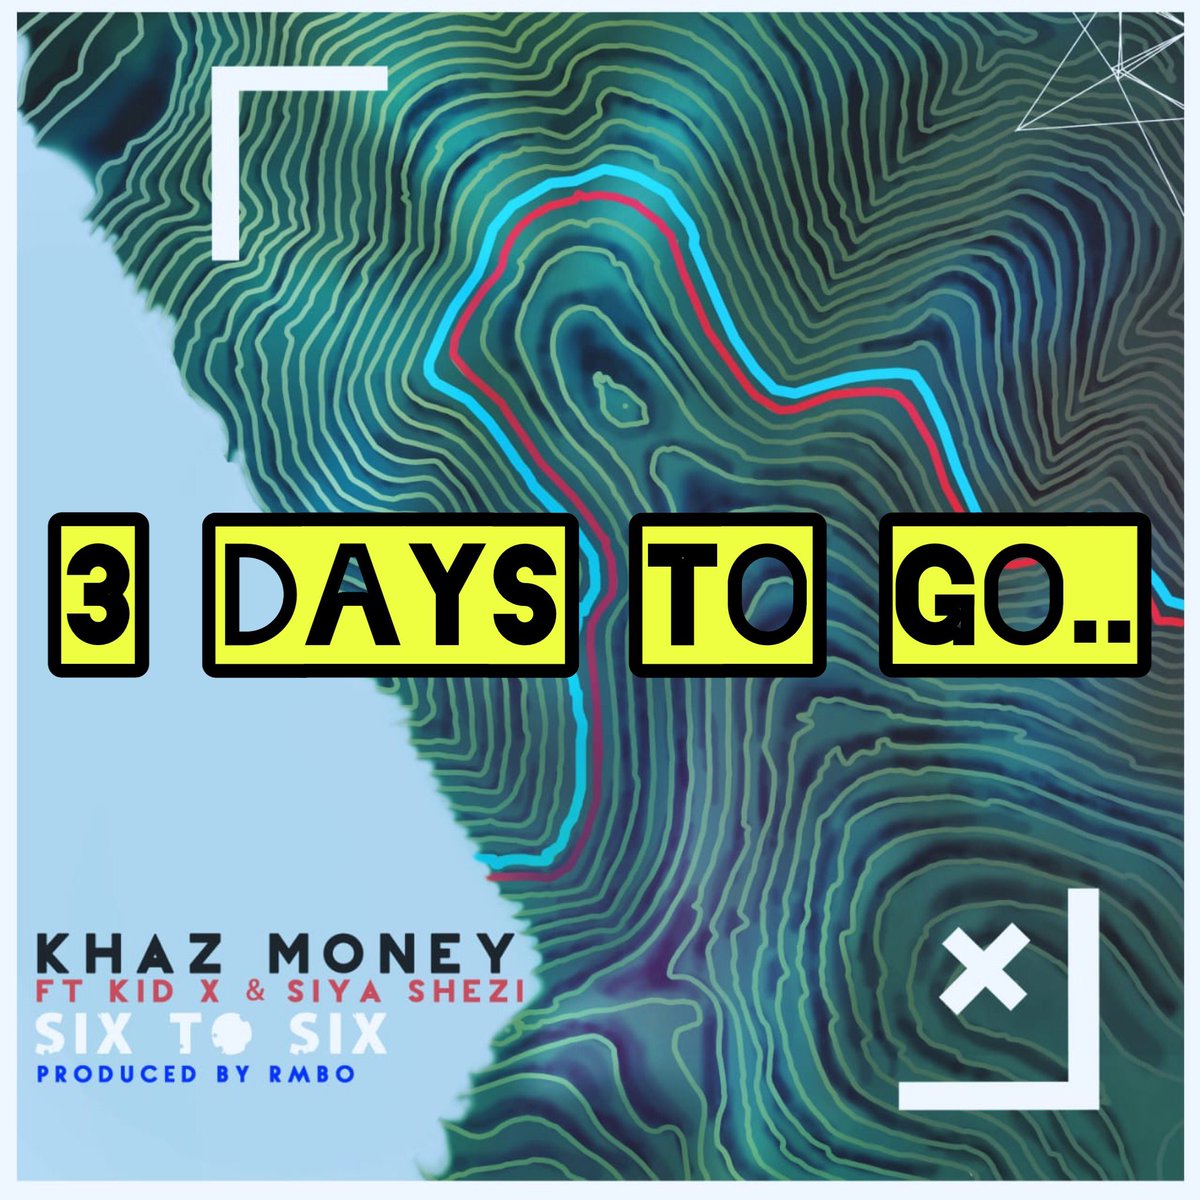 Only 3 days to go till the official release of my debut single #SixtoSix 🔥🔥ft. @KidXSA & @siya_shezi prod. by @RMBOmusic 🔥🔥#kwaito #HipHop #KasiLife #kwaitomusic #rmbomusic #kidx #khazmoney #SiyaShezi #SixtoSix